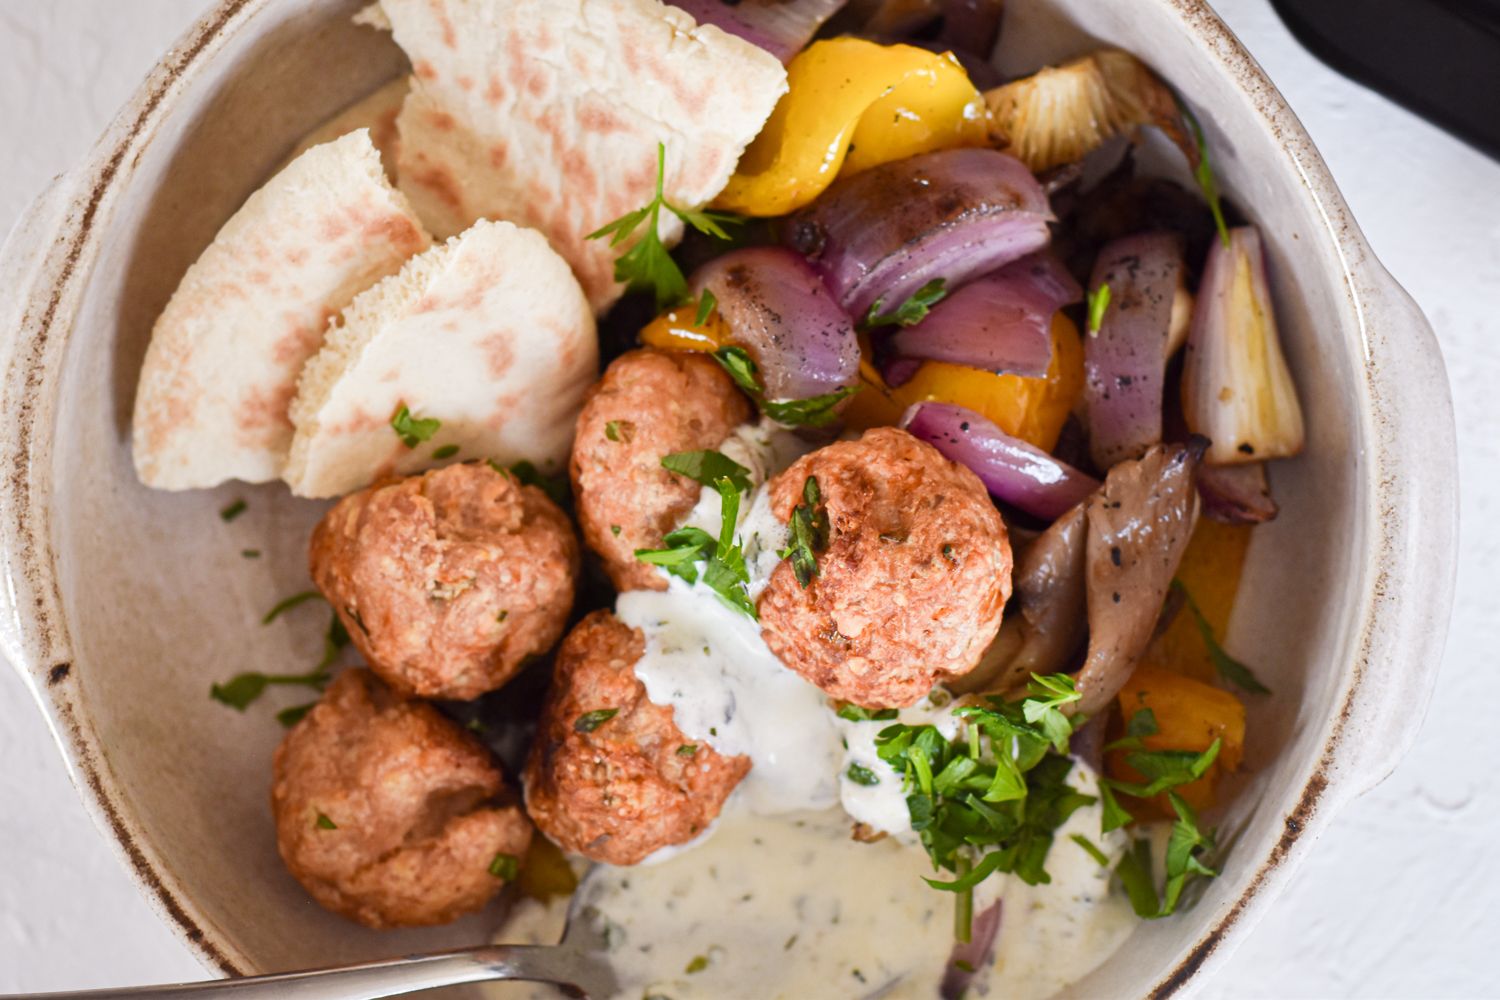 Chicken feta meatballs in a bowl with roasted vegetables pita bread, and tzatziki sauce.